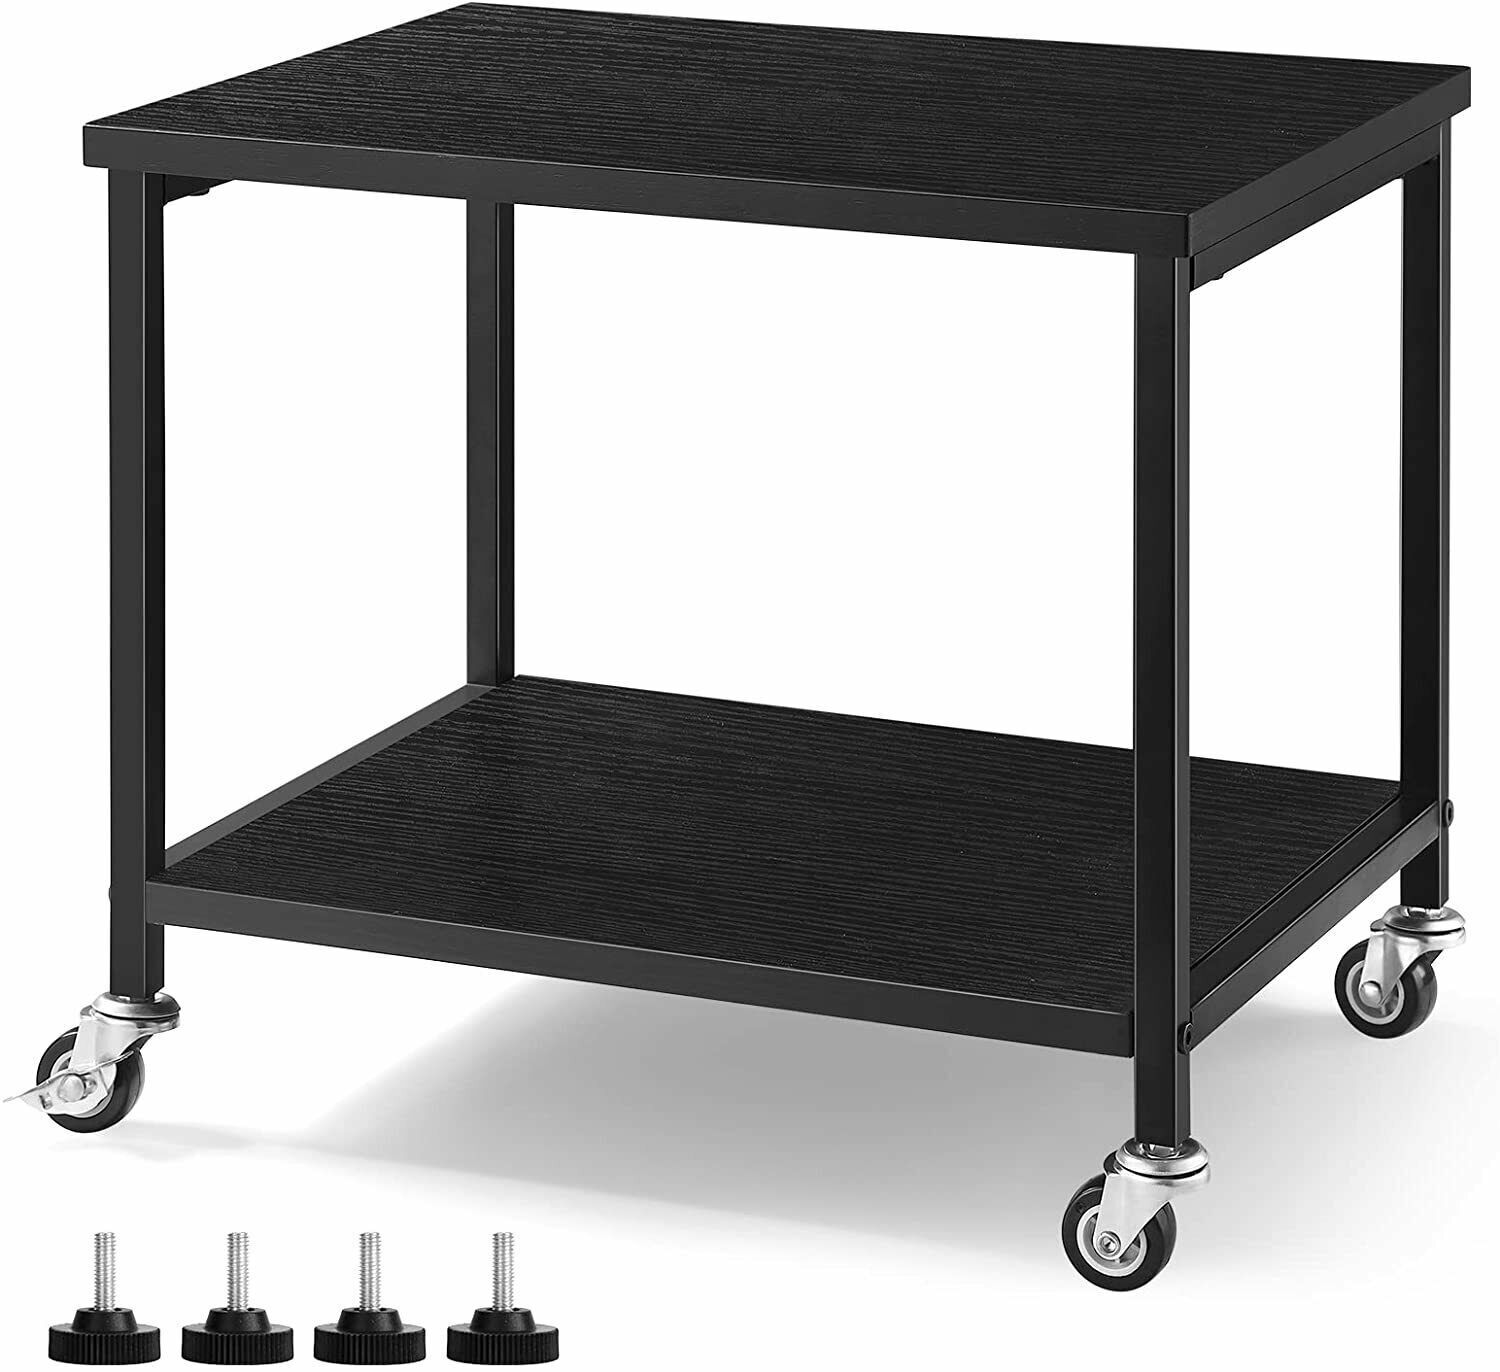 2-Tier Printer Stand, Under-Desk Printer Cart with 360-degree Wheels for Office